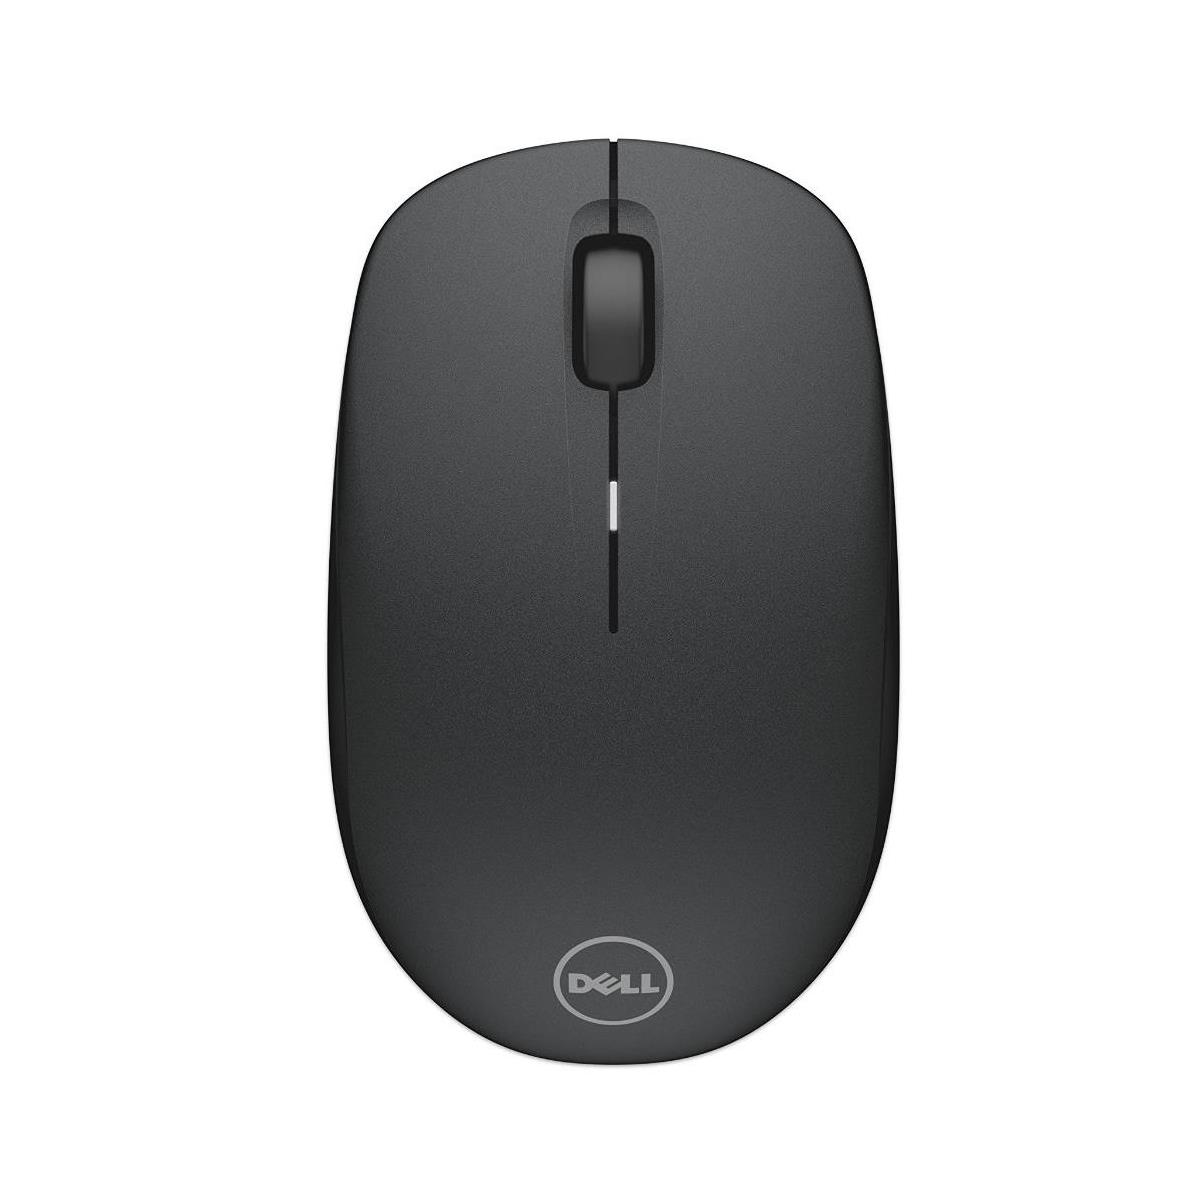 

Dell WM126 Optical Wireless Mouse, Black